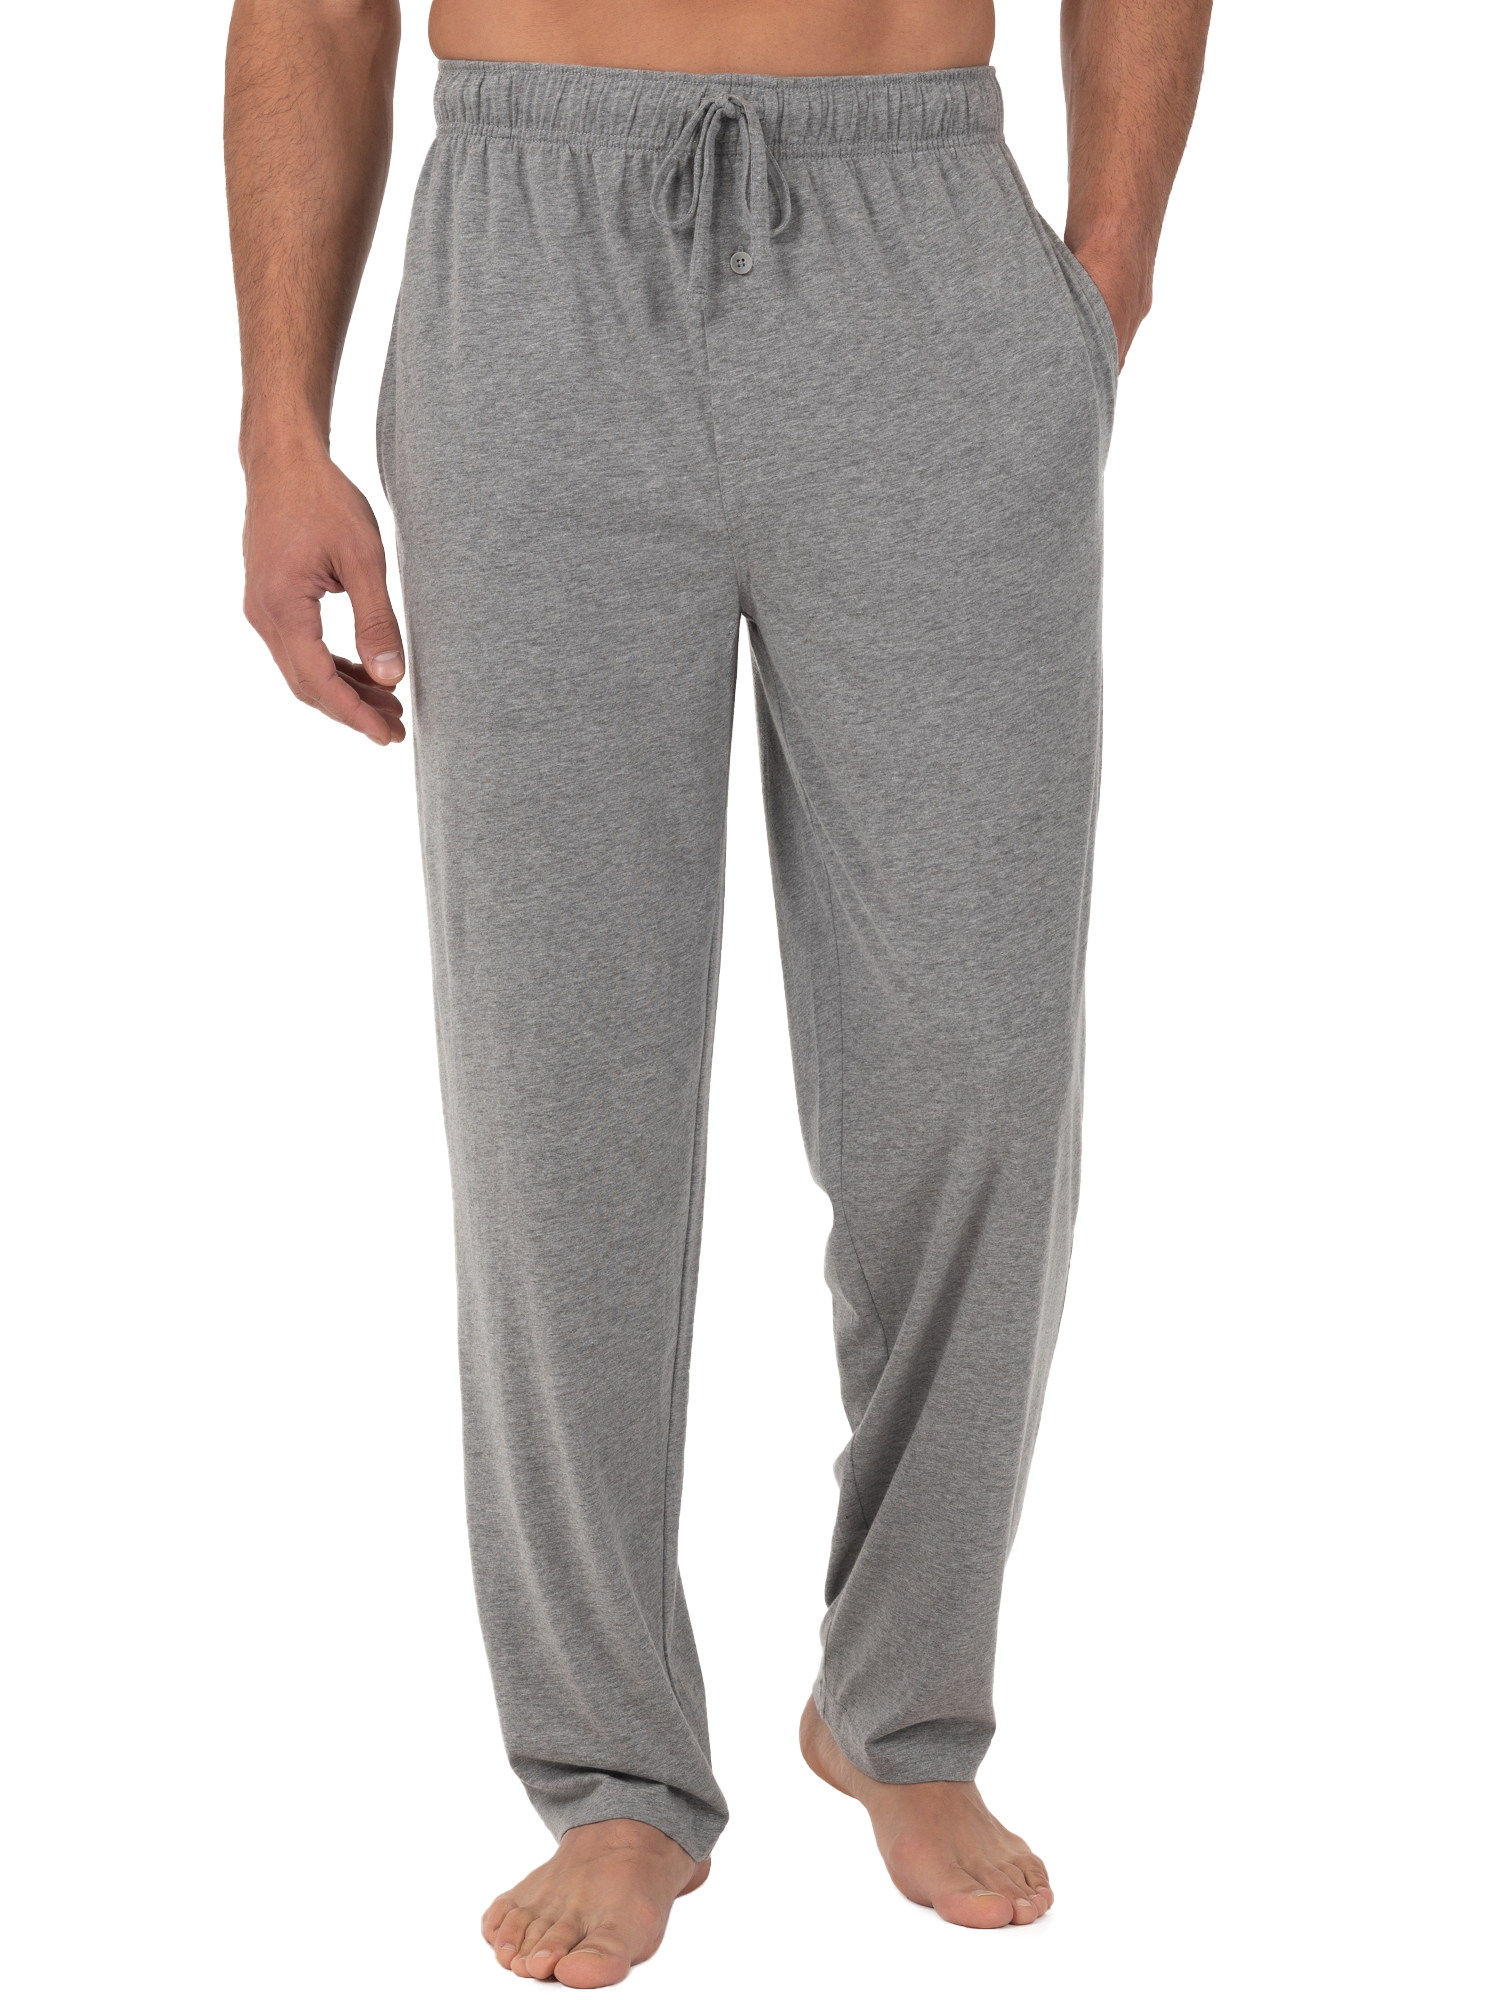 Fruit of the Loom Men's and Big Men's Jersey Knit Pajama Pants, Sizes S-6XL - image 1 of 9